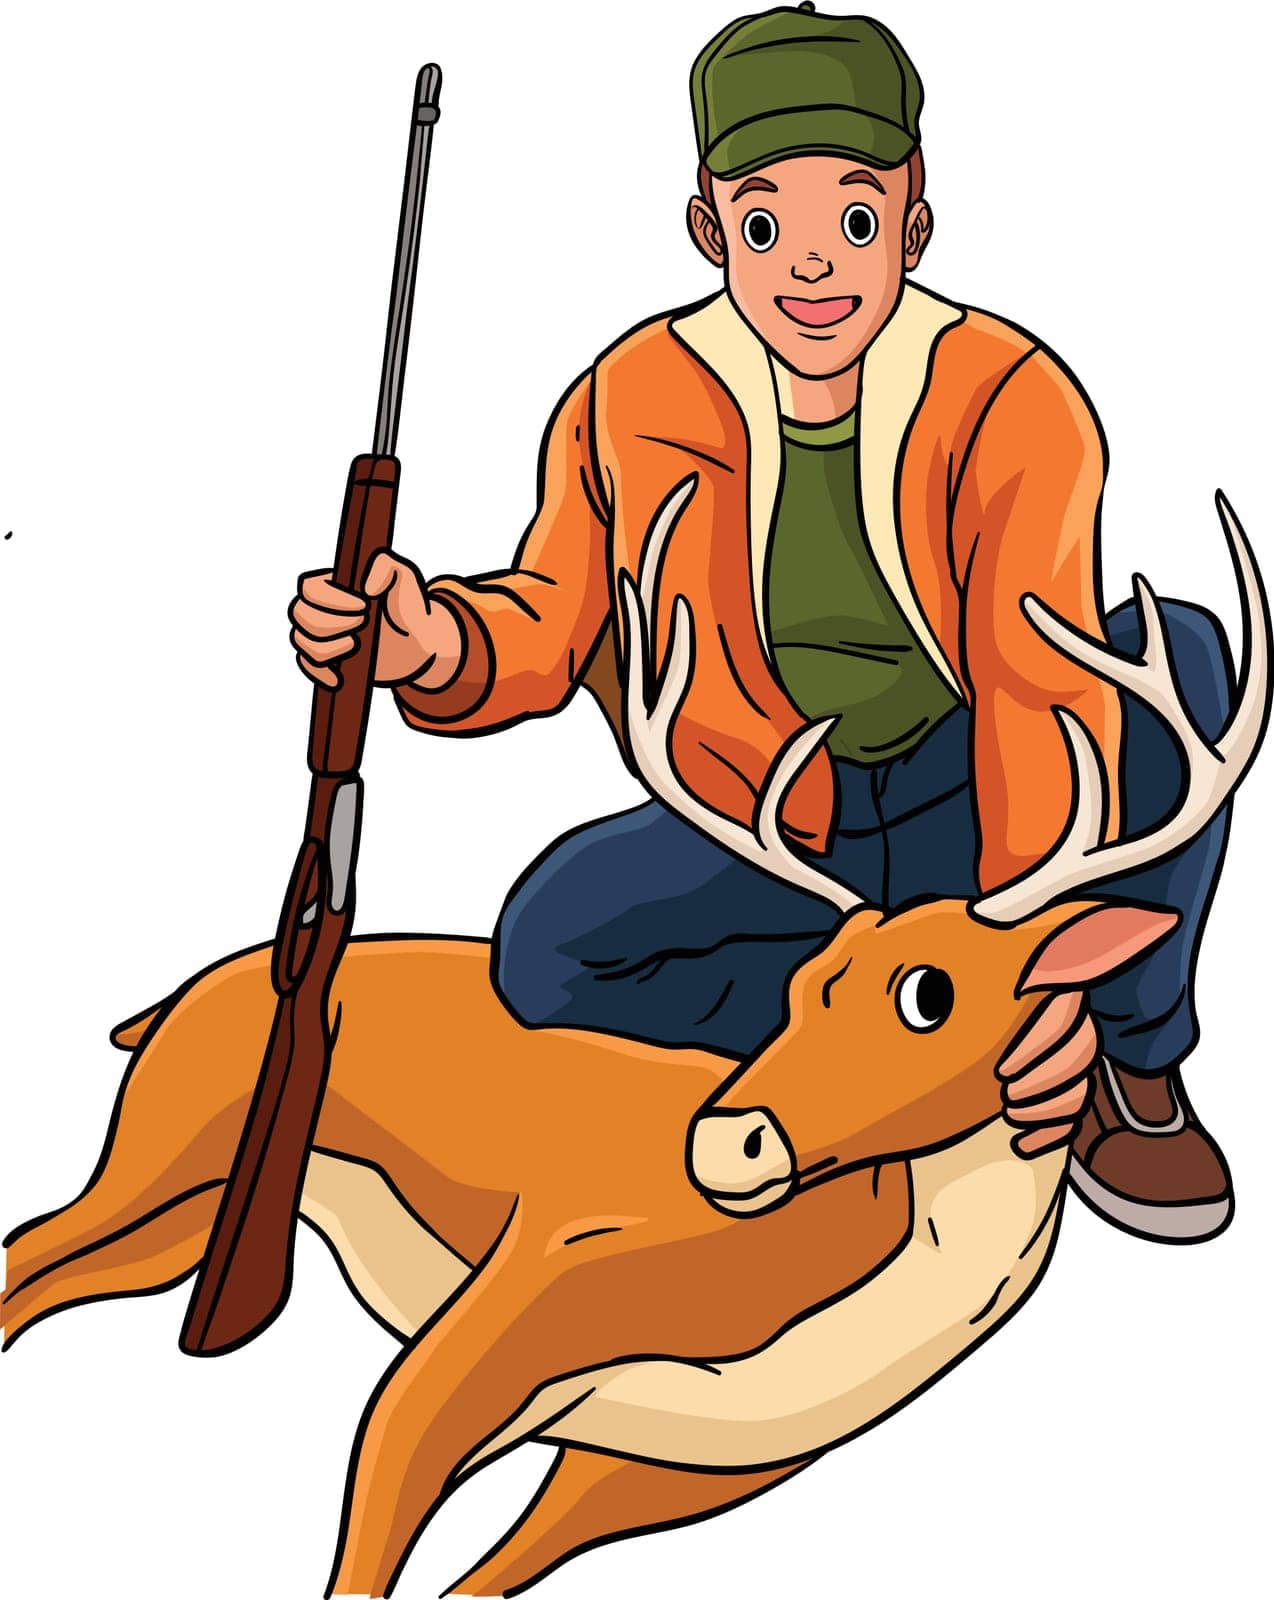 Deer Hunting Cartoon Colored Clipart Illustration by abbydesign